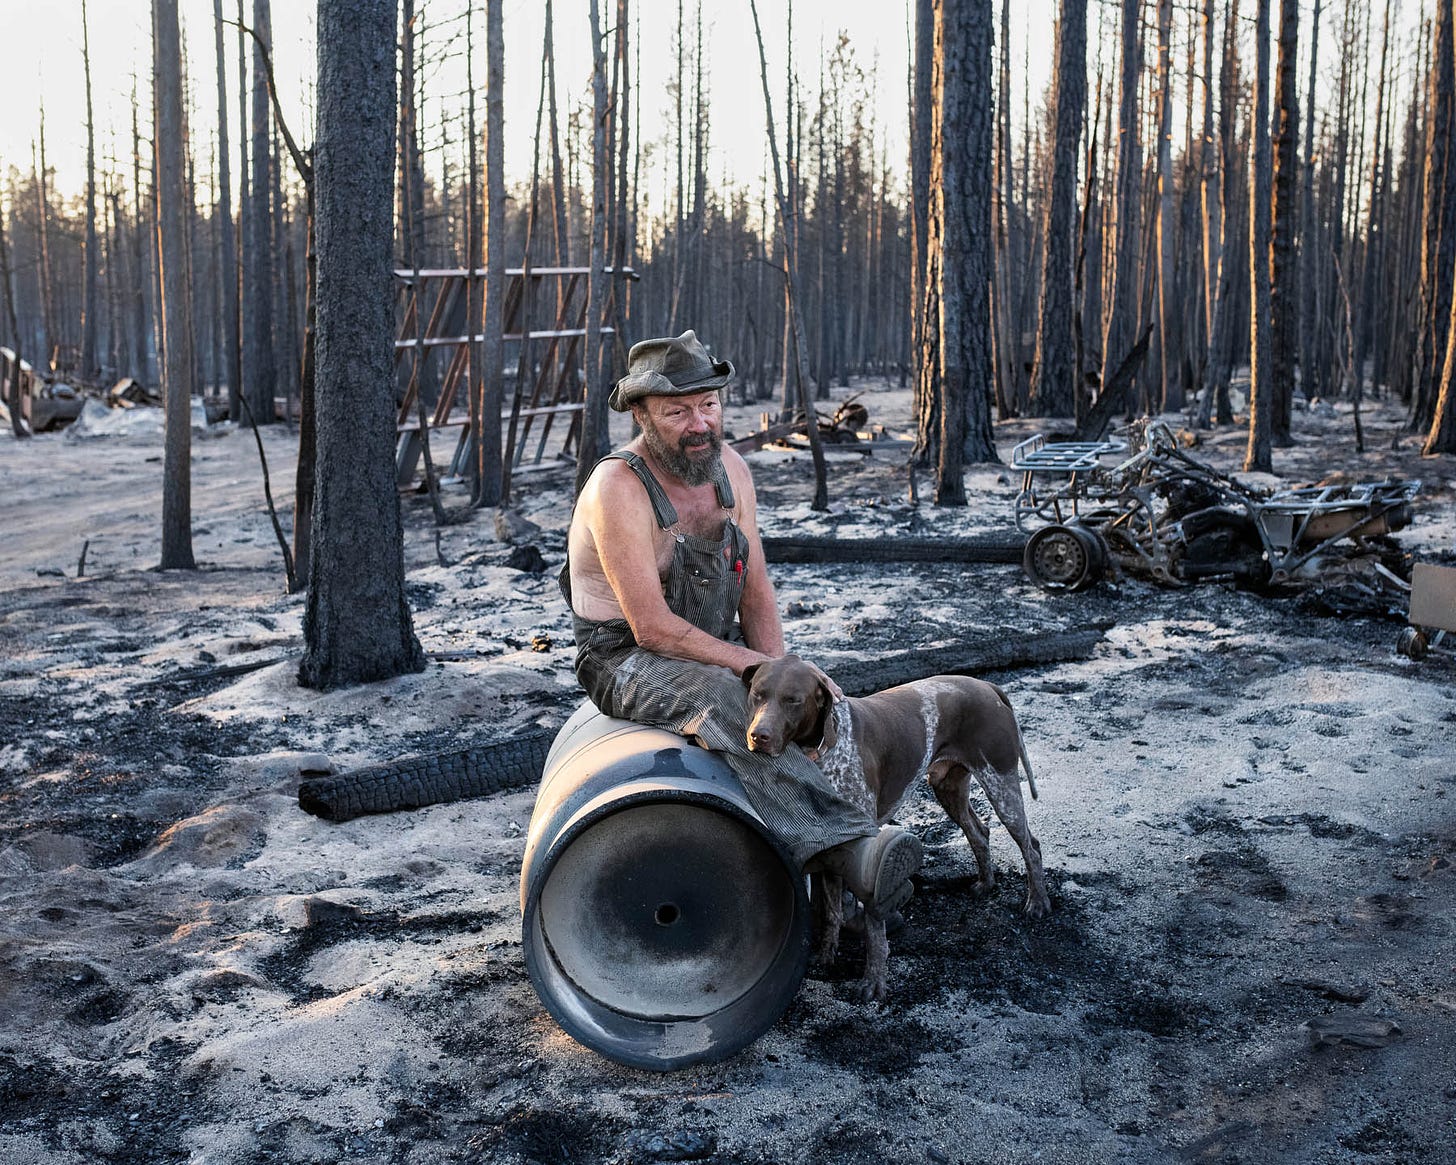 Jeff Whited sits among his destroyed belongings on July 22. The Bootleg Fire arrived “just like a freight train,” says Whited. “It looks like a freaking bomb went off.” The 63-year-old had been helping clean up the wreckage of his brother’s burned-down house when flames reached his own. Guitars and amplifiers, snowmobiles and trucks, engine parts, chain saws, a huge cache of hand tools and much more—all gone, Whited says. “This sure was a beautiful place,” he says. “It doesn’t leave a beautiful memory with me, not this picture of it.” At the grave of his partner on his 12-acre property, wind chimes used to hang in the trees. Whited recalls asking why she wanted so many of them, to which she replied, “When I'm gone, baby, you’ll know I’m still there when you hear ’em.” After the fire, he says, “I can’t hear one. They’re gone. Every wind chime.”
